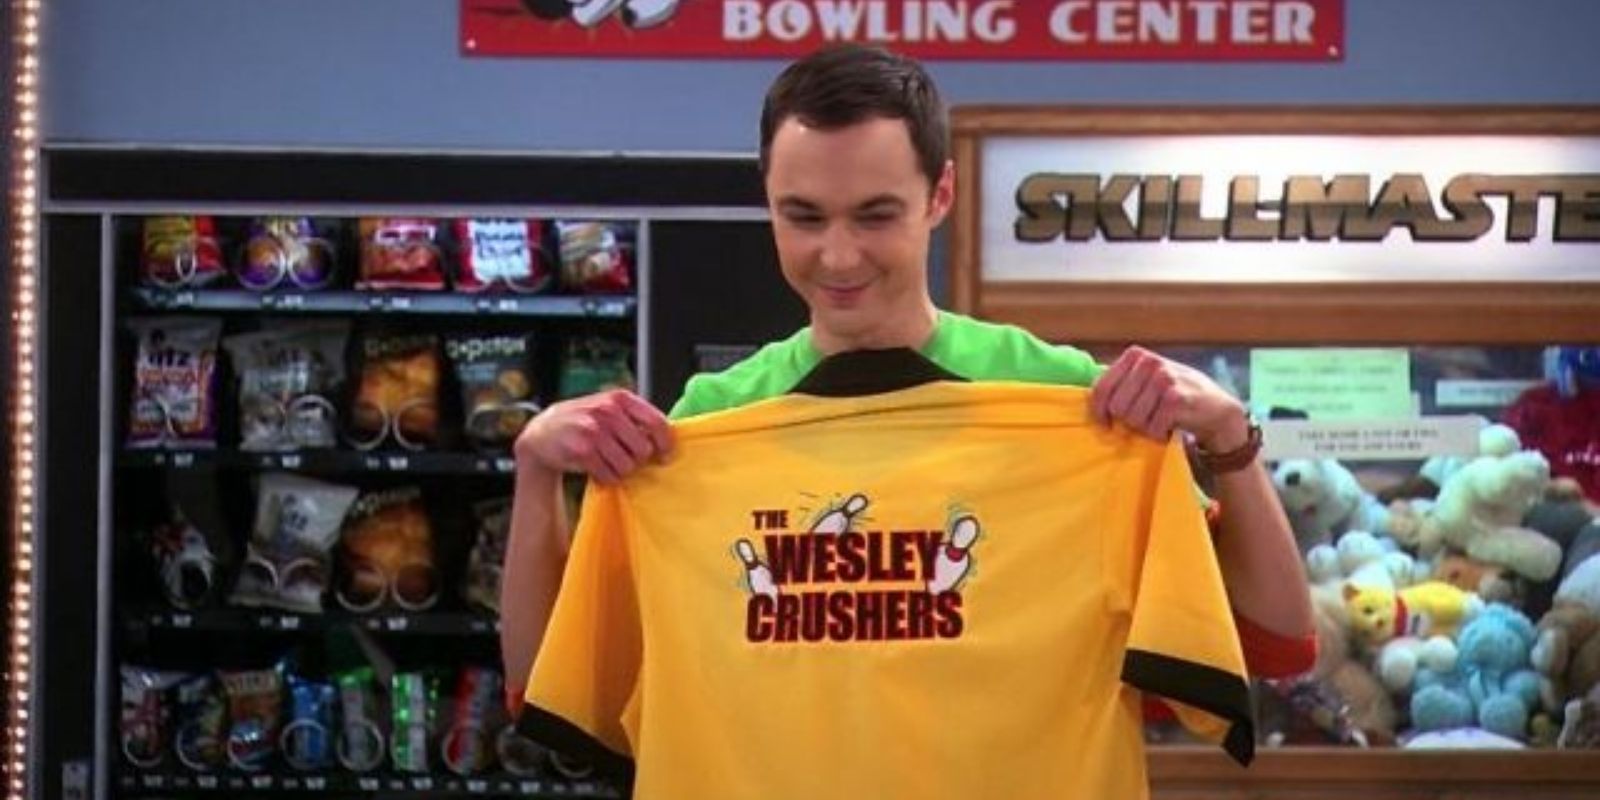 Sheldon Cooper holding up a yellow bowling shirt that reads The Wesley Crushers in The Big Bang Theory